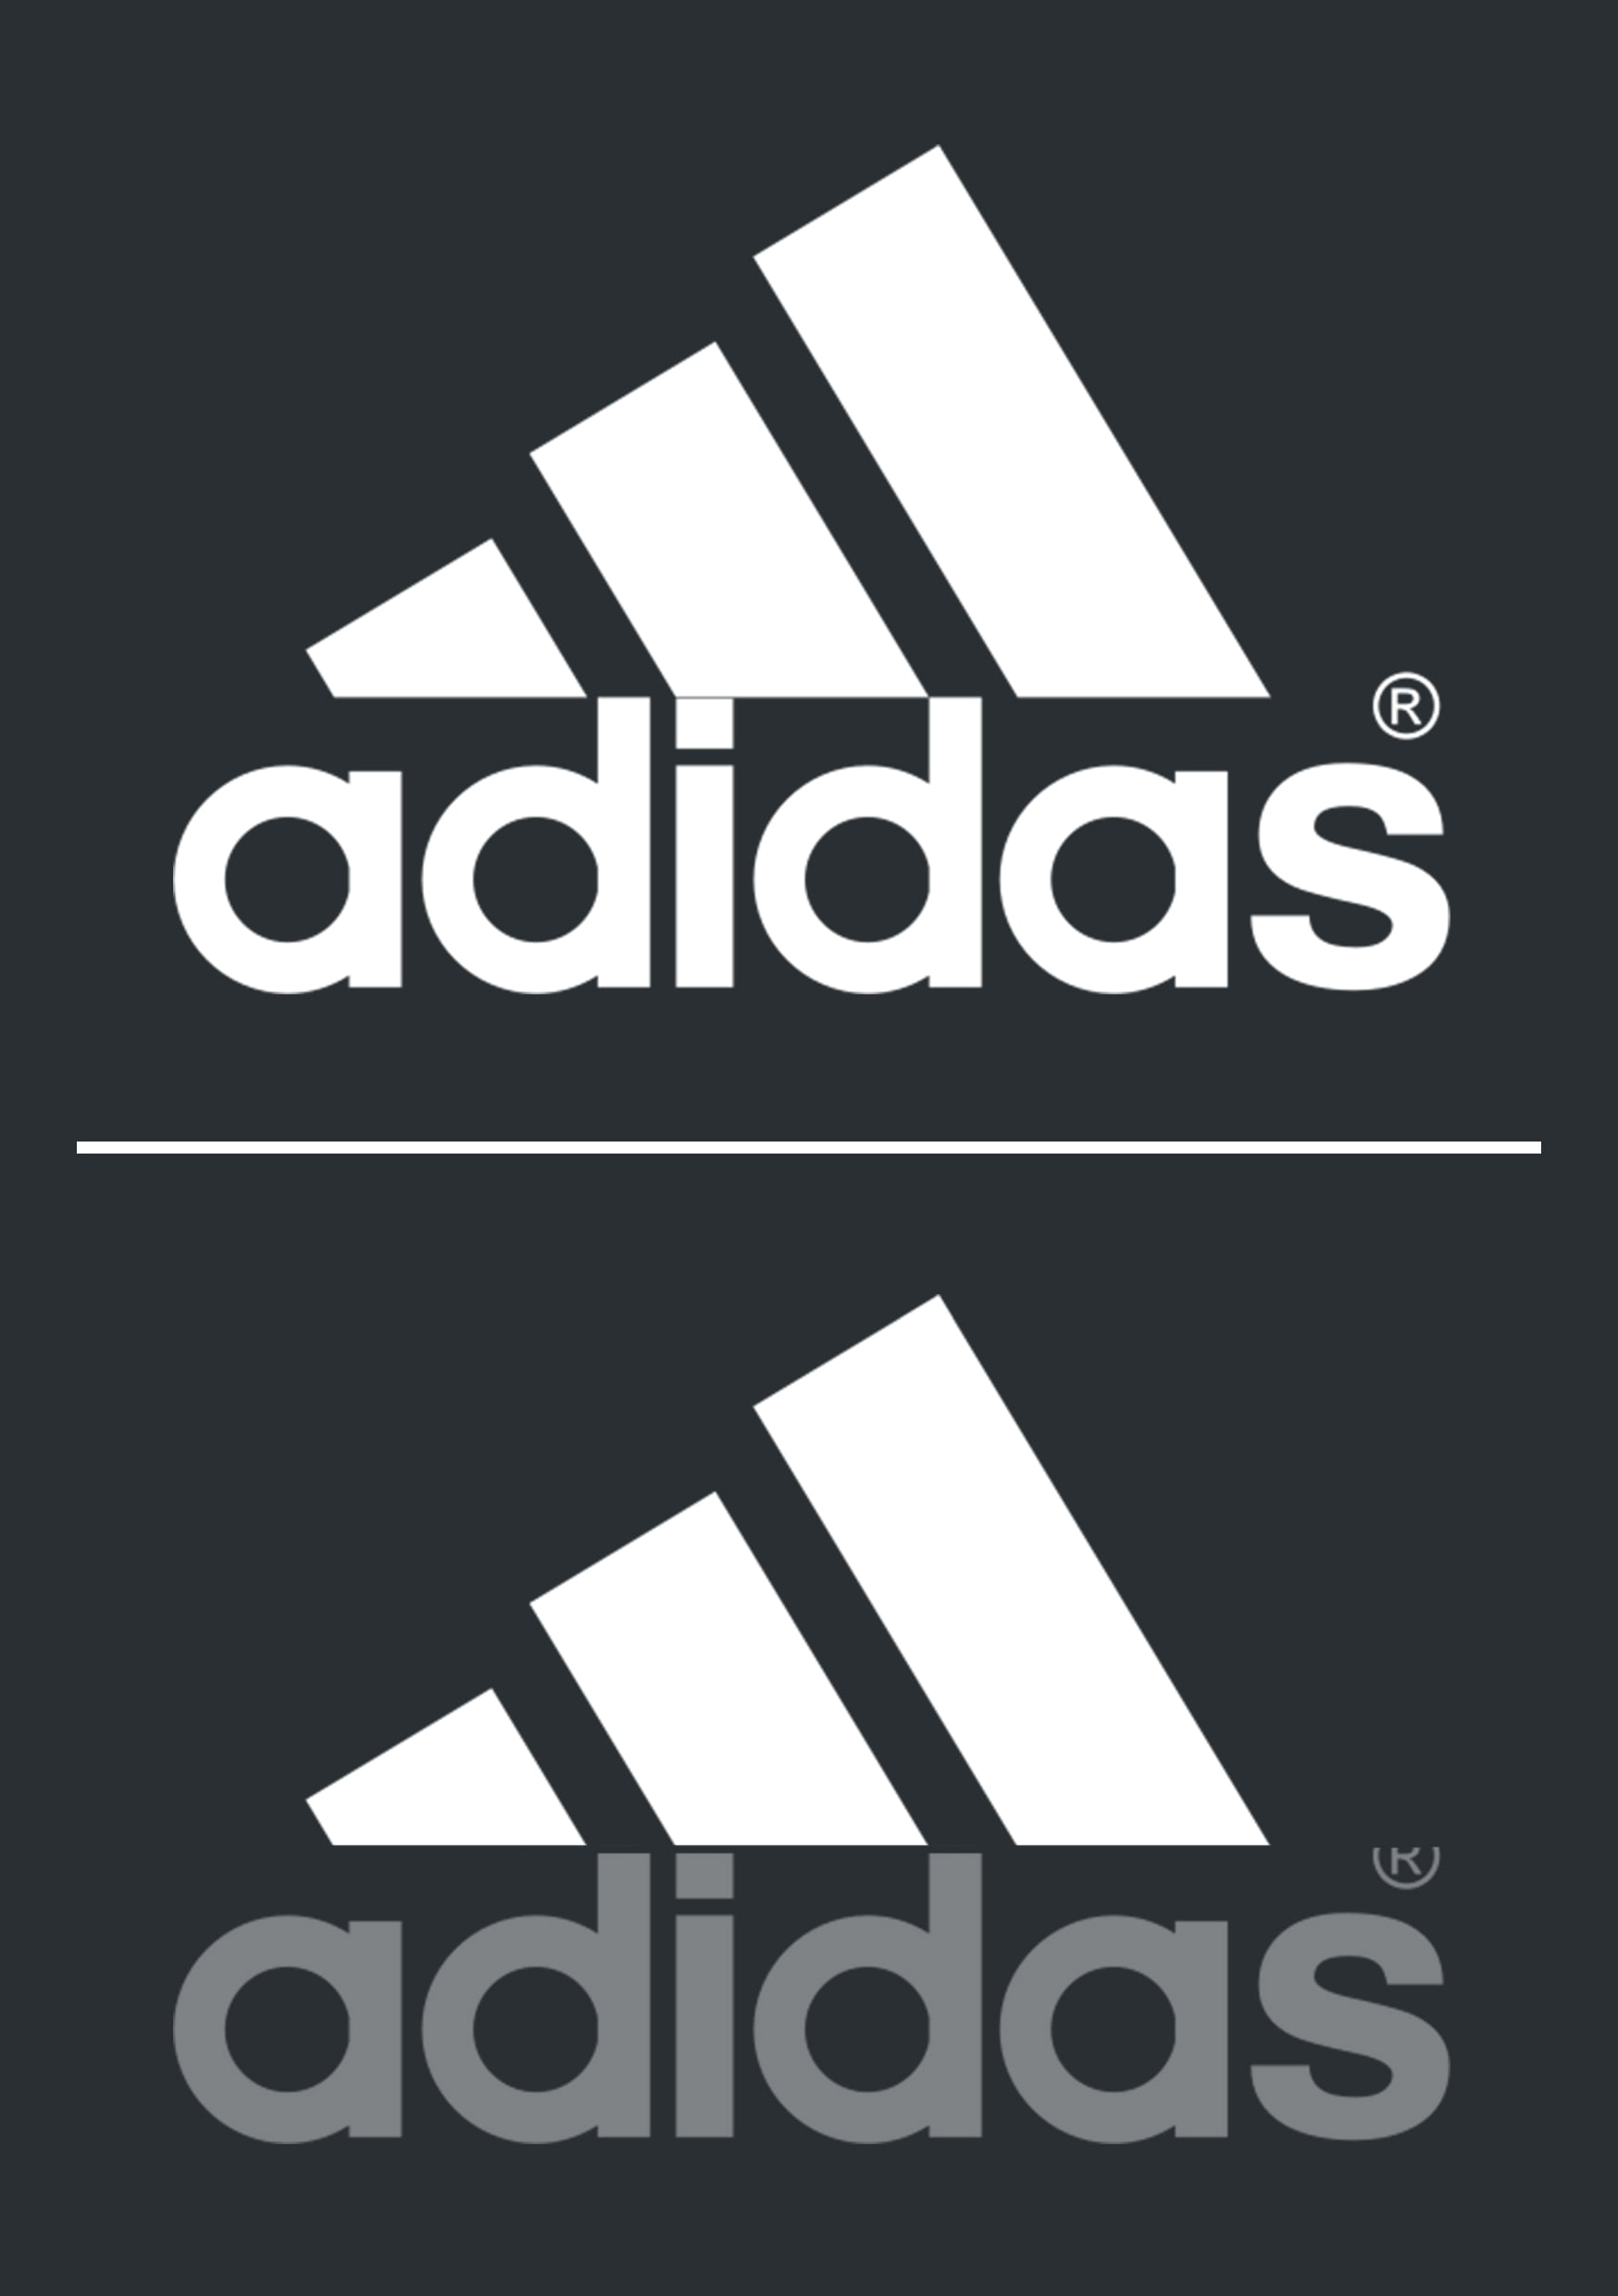 adidas meaning